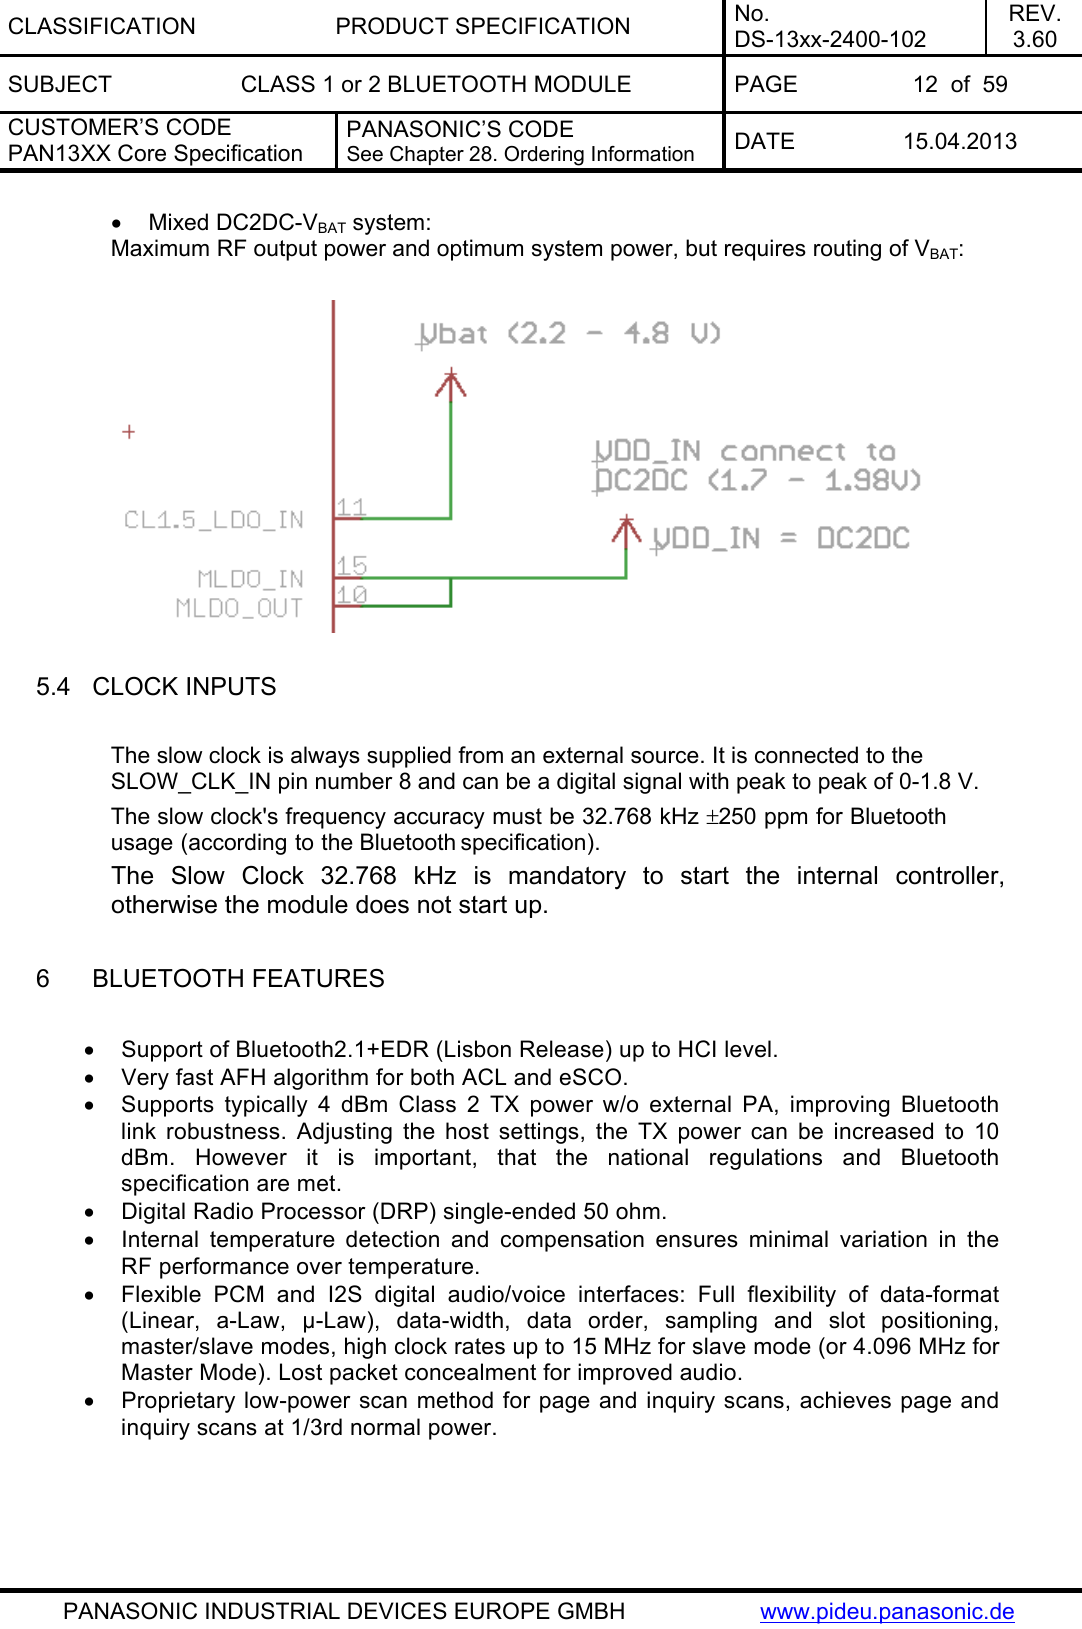 CLASSIFICATION PRODUCT SPECIFICATION No. DS-13xx-2400-102 REV. 3.60 SUBJECT  CLASS 1 or 2 BLUETOOTH MODULE  PAGE  12  of  59 CUSTOMER’S CODE PAN13XX Core Specification PANASONIC’S CODE See Chapter 28. Ordering Information  DATE 15.04.2013   PANASONIC INDUSTRIAL DEVICES EUROPE GMBH  www.pideu.panasonic.de • Mixed DC2DC-VBAT system: Maximum RF output power and optimum system power, but requires routing of VBAT:    5.4  CLOCK INPUTS  The slow clock is always supplied from an external source. It is connected to the SLOW_CLK_IN pin number 8 and can be a digital signal with peak to peak of 0-1.8 V. The slow clock&apos;s frequency accuracy must be 32.768 kHz ±250 ppm for Bluetooth usage (according to the Bluetooth specification). The Slow Clock 32.768 kHz is mandatory to start the internal controller, otherwise the module does not start up.   6  BLUETOOTH FEATURES  •  Support of Bluetooth2.1+EDR (Lisbon Release) up to HCI level. •  Very fast AFH algorithm for both ACL and eSCO. •  Supports typically 4 dBm Class 2 TX power w/o external PA, improving Bluetooth link robustness. Adjusting the host settings, the TX power can be increased to 10 dBm. However it is important, that the national regulations and Bluetooth specification are met. •  Digital Radio Processor (DRP) single-ended 50 ohm. •  Internal temperature detection and compensation ensures minimal variation in the RF performance over temperature. •  Flexible PCM and I2S digital audio/voice interfaces: Full flexibility of data-format (Linear, a-Law, µ-Law), data-width, data order, sampling and slot positioning, master/slave modes, high clock rates up to 15 MHz for slave mode (or 4.096 MHz for Master Mode). Lost packet concealment for improved audio. •  Proprietary low-power scan method for page and inquiry scans, achieves page and inquiry scans at 1/3rd normal power.    